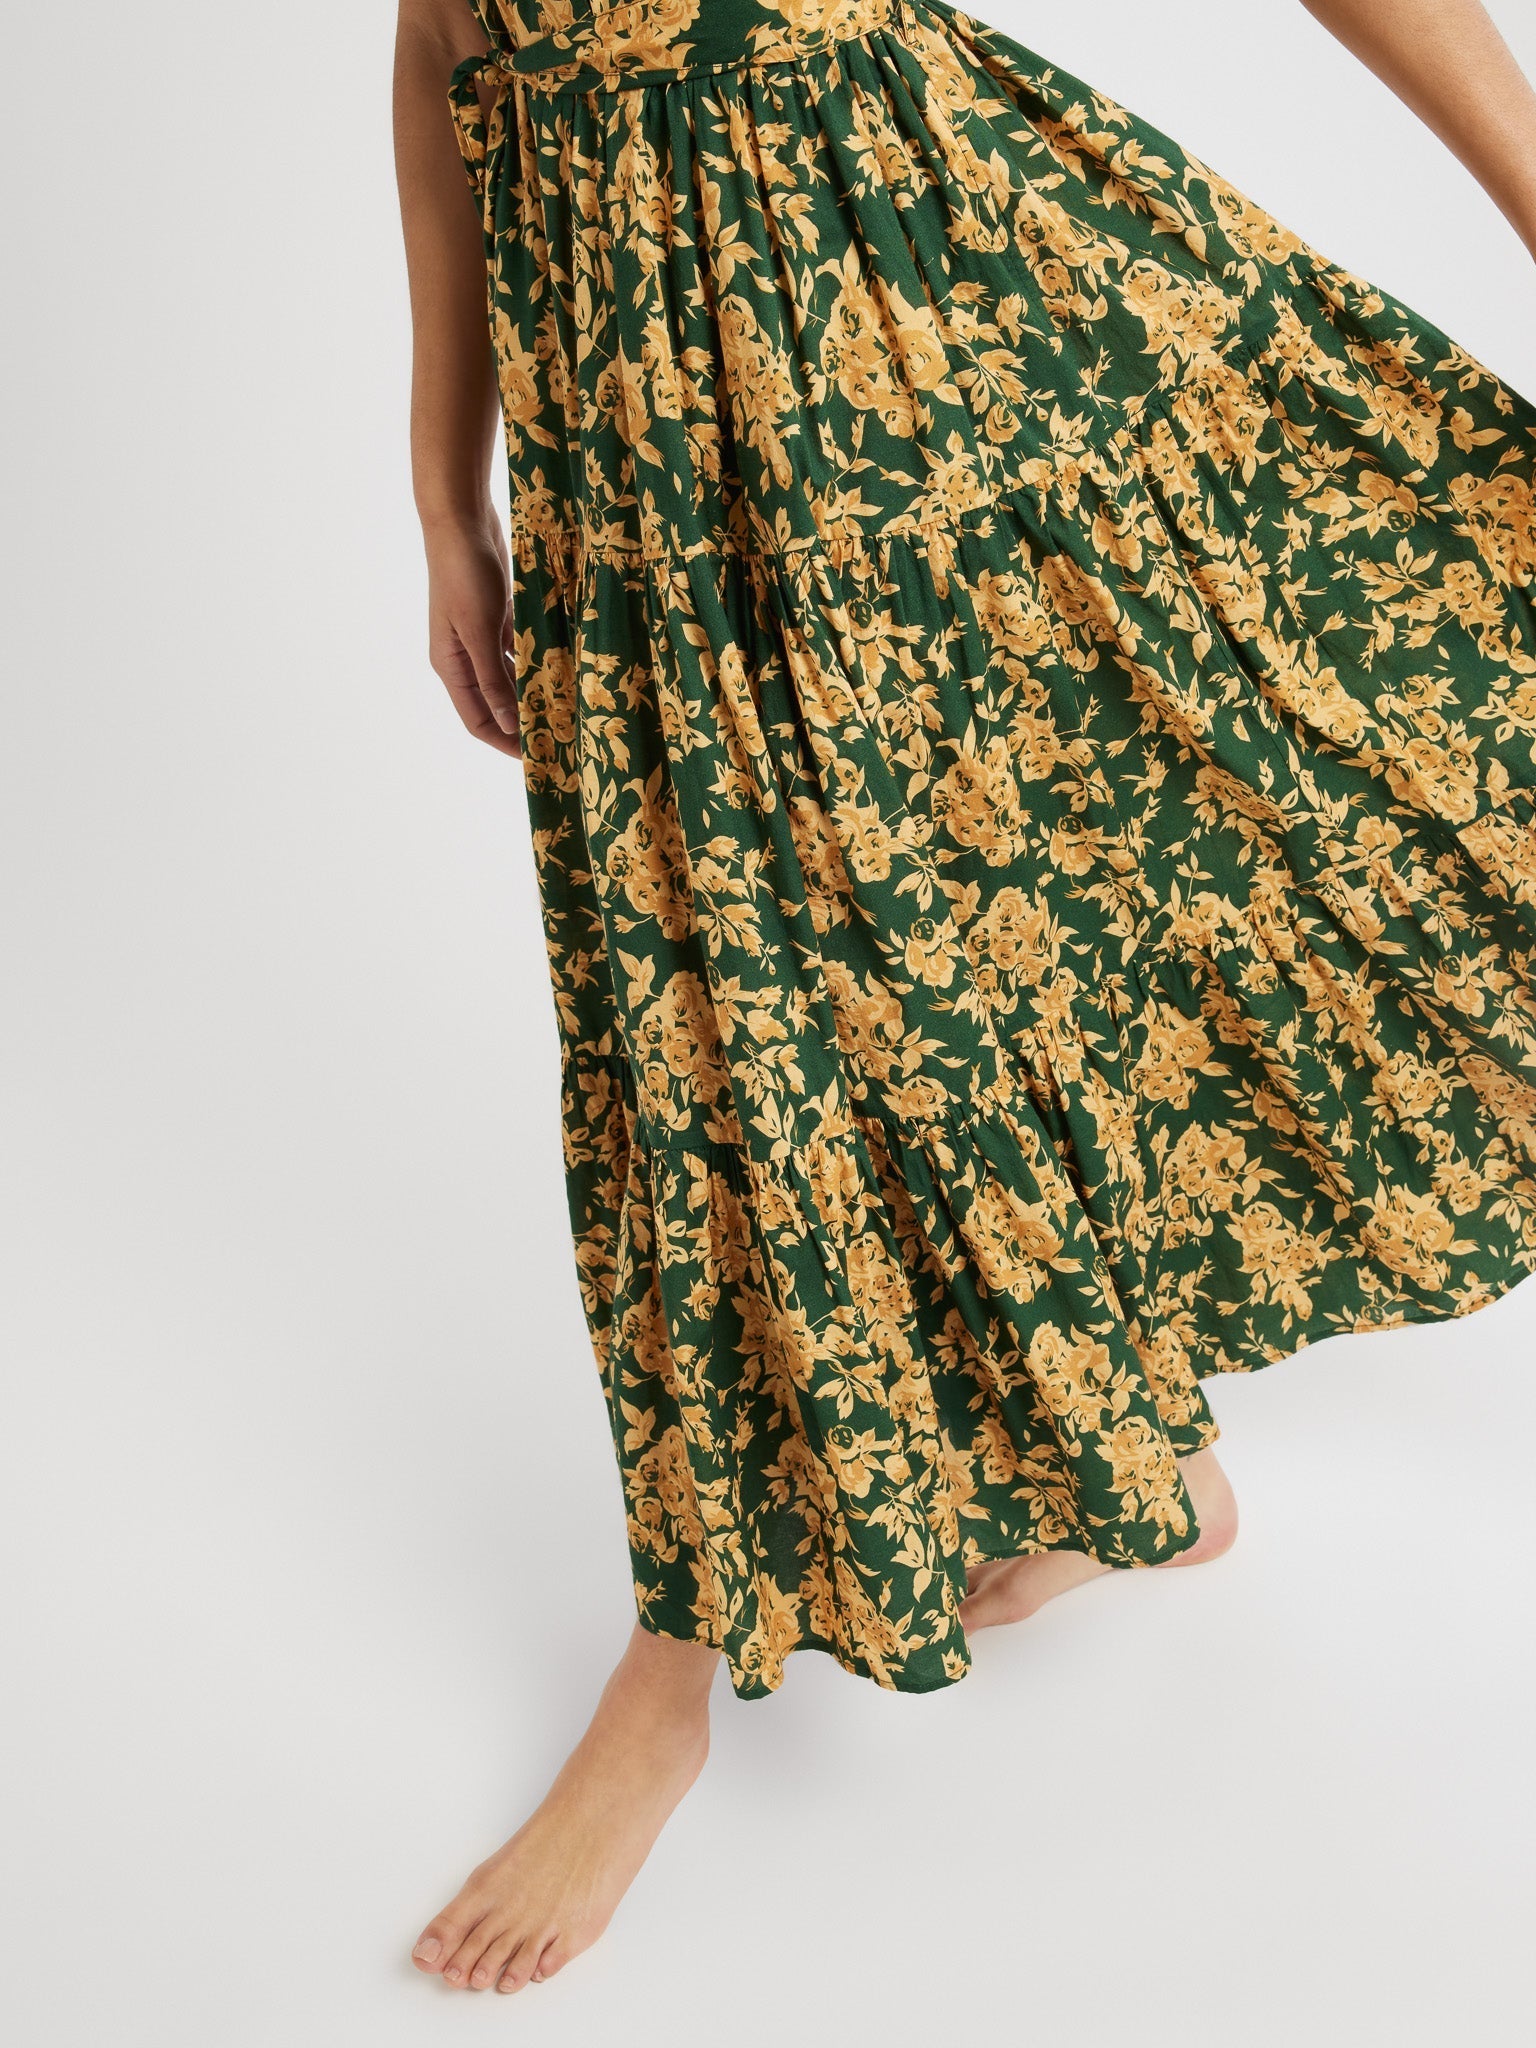 MILLE Clothing Victoria Dress in Emerald Bouquet